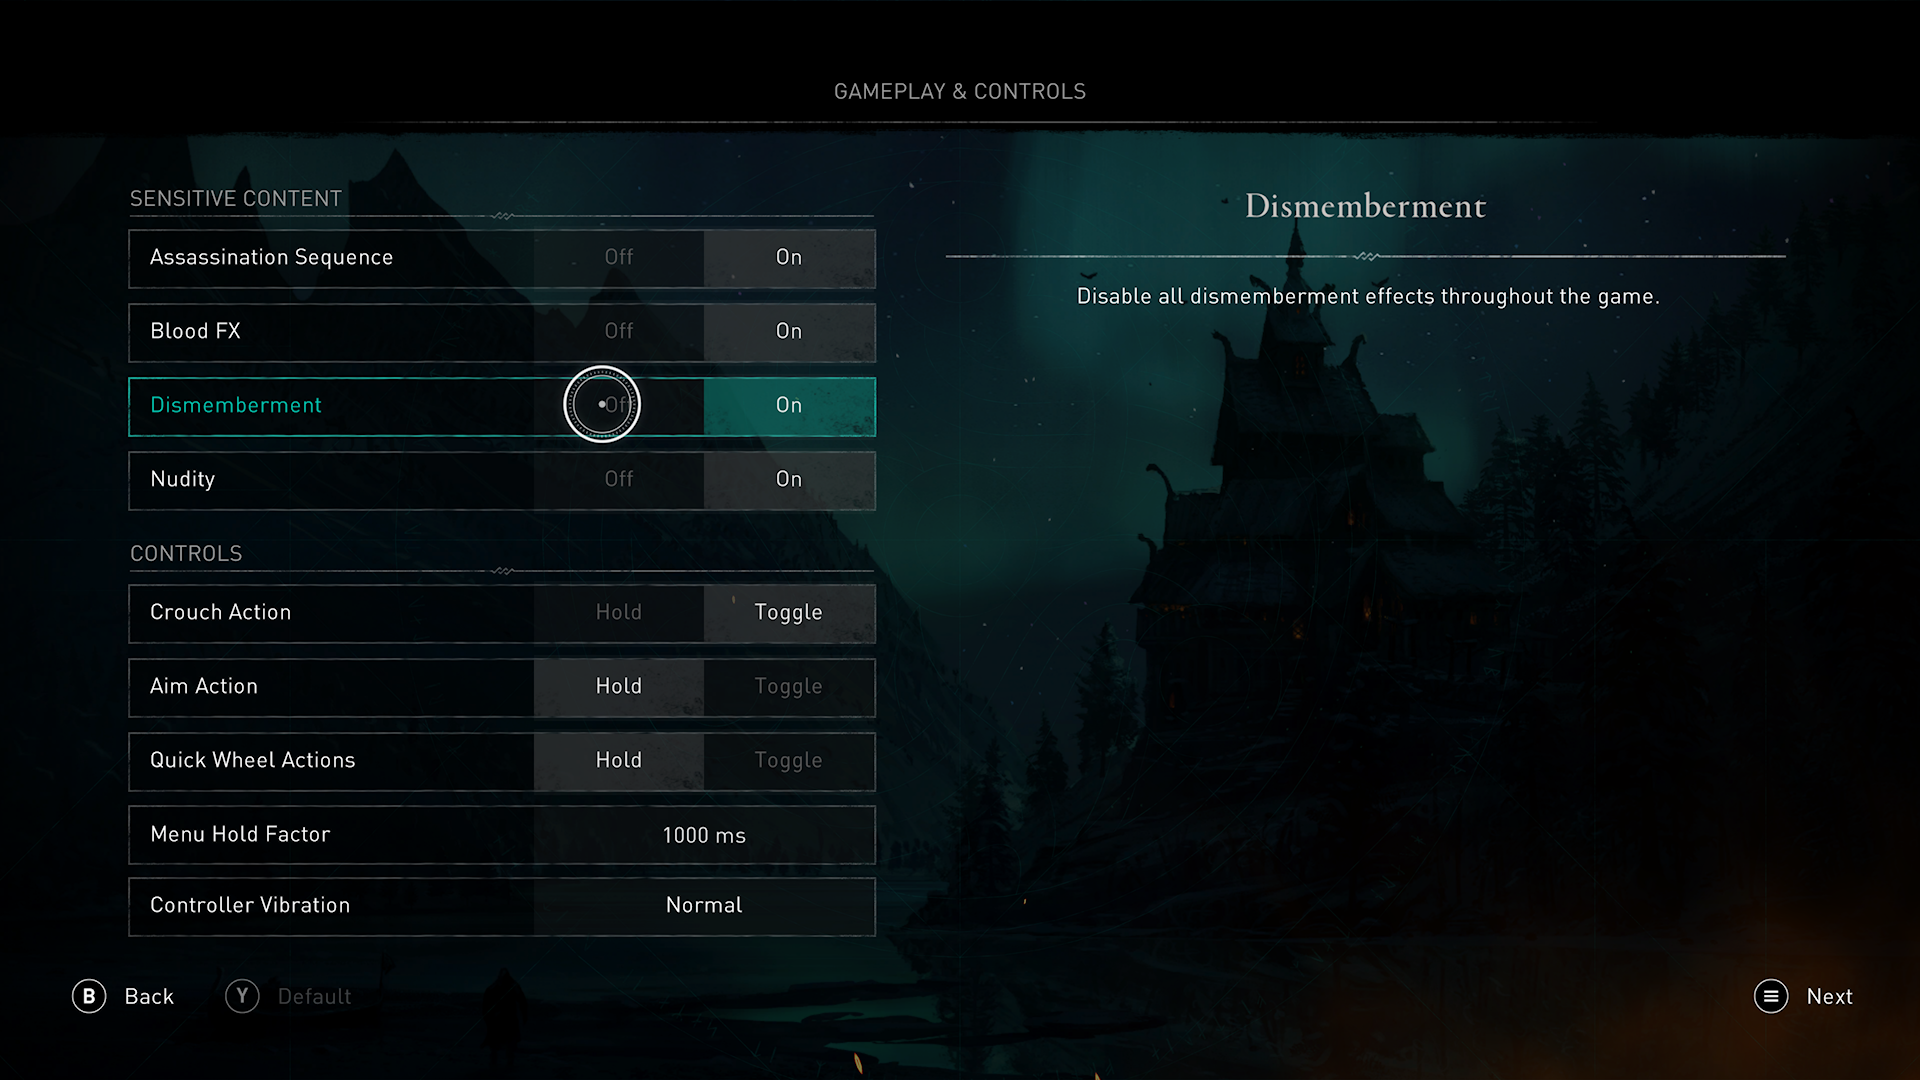 A screenshot from Assassin's Creed Valhalla gameplay and controls menu. Under the sensitive content sub-category, the dismemberment setting has focus. The setting is currently toggled to on.